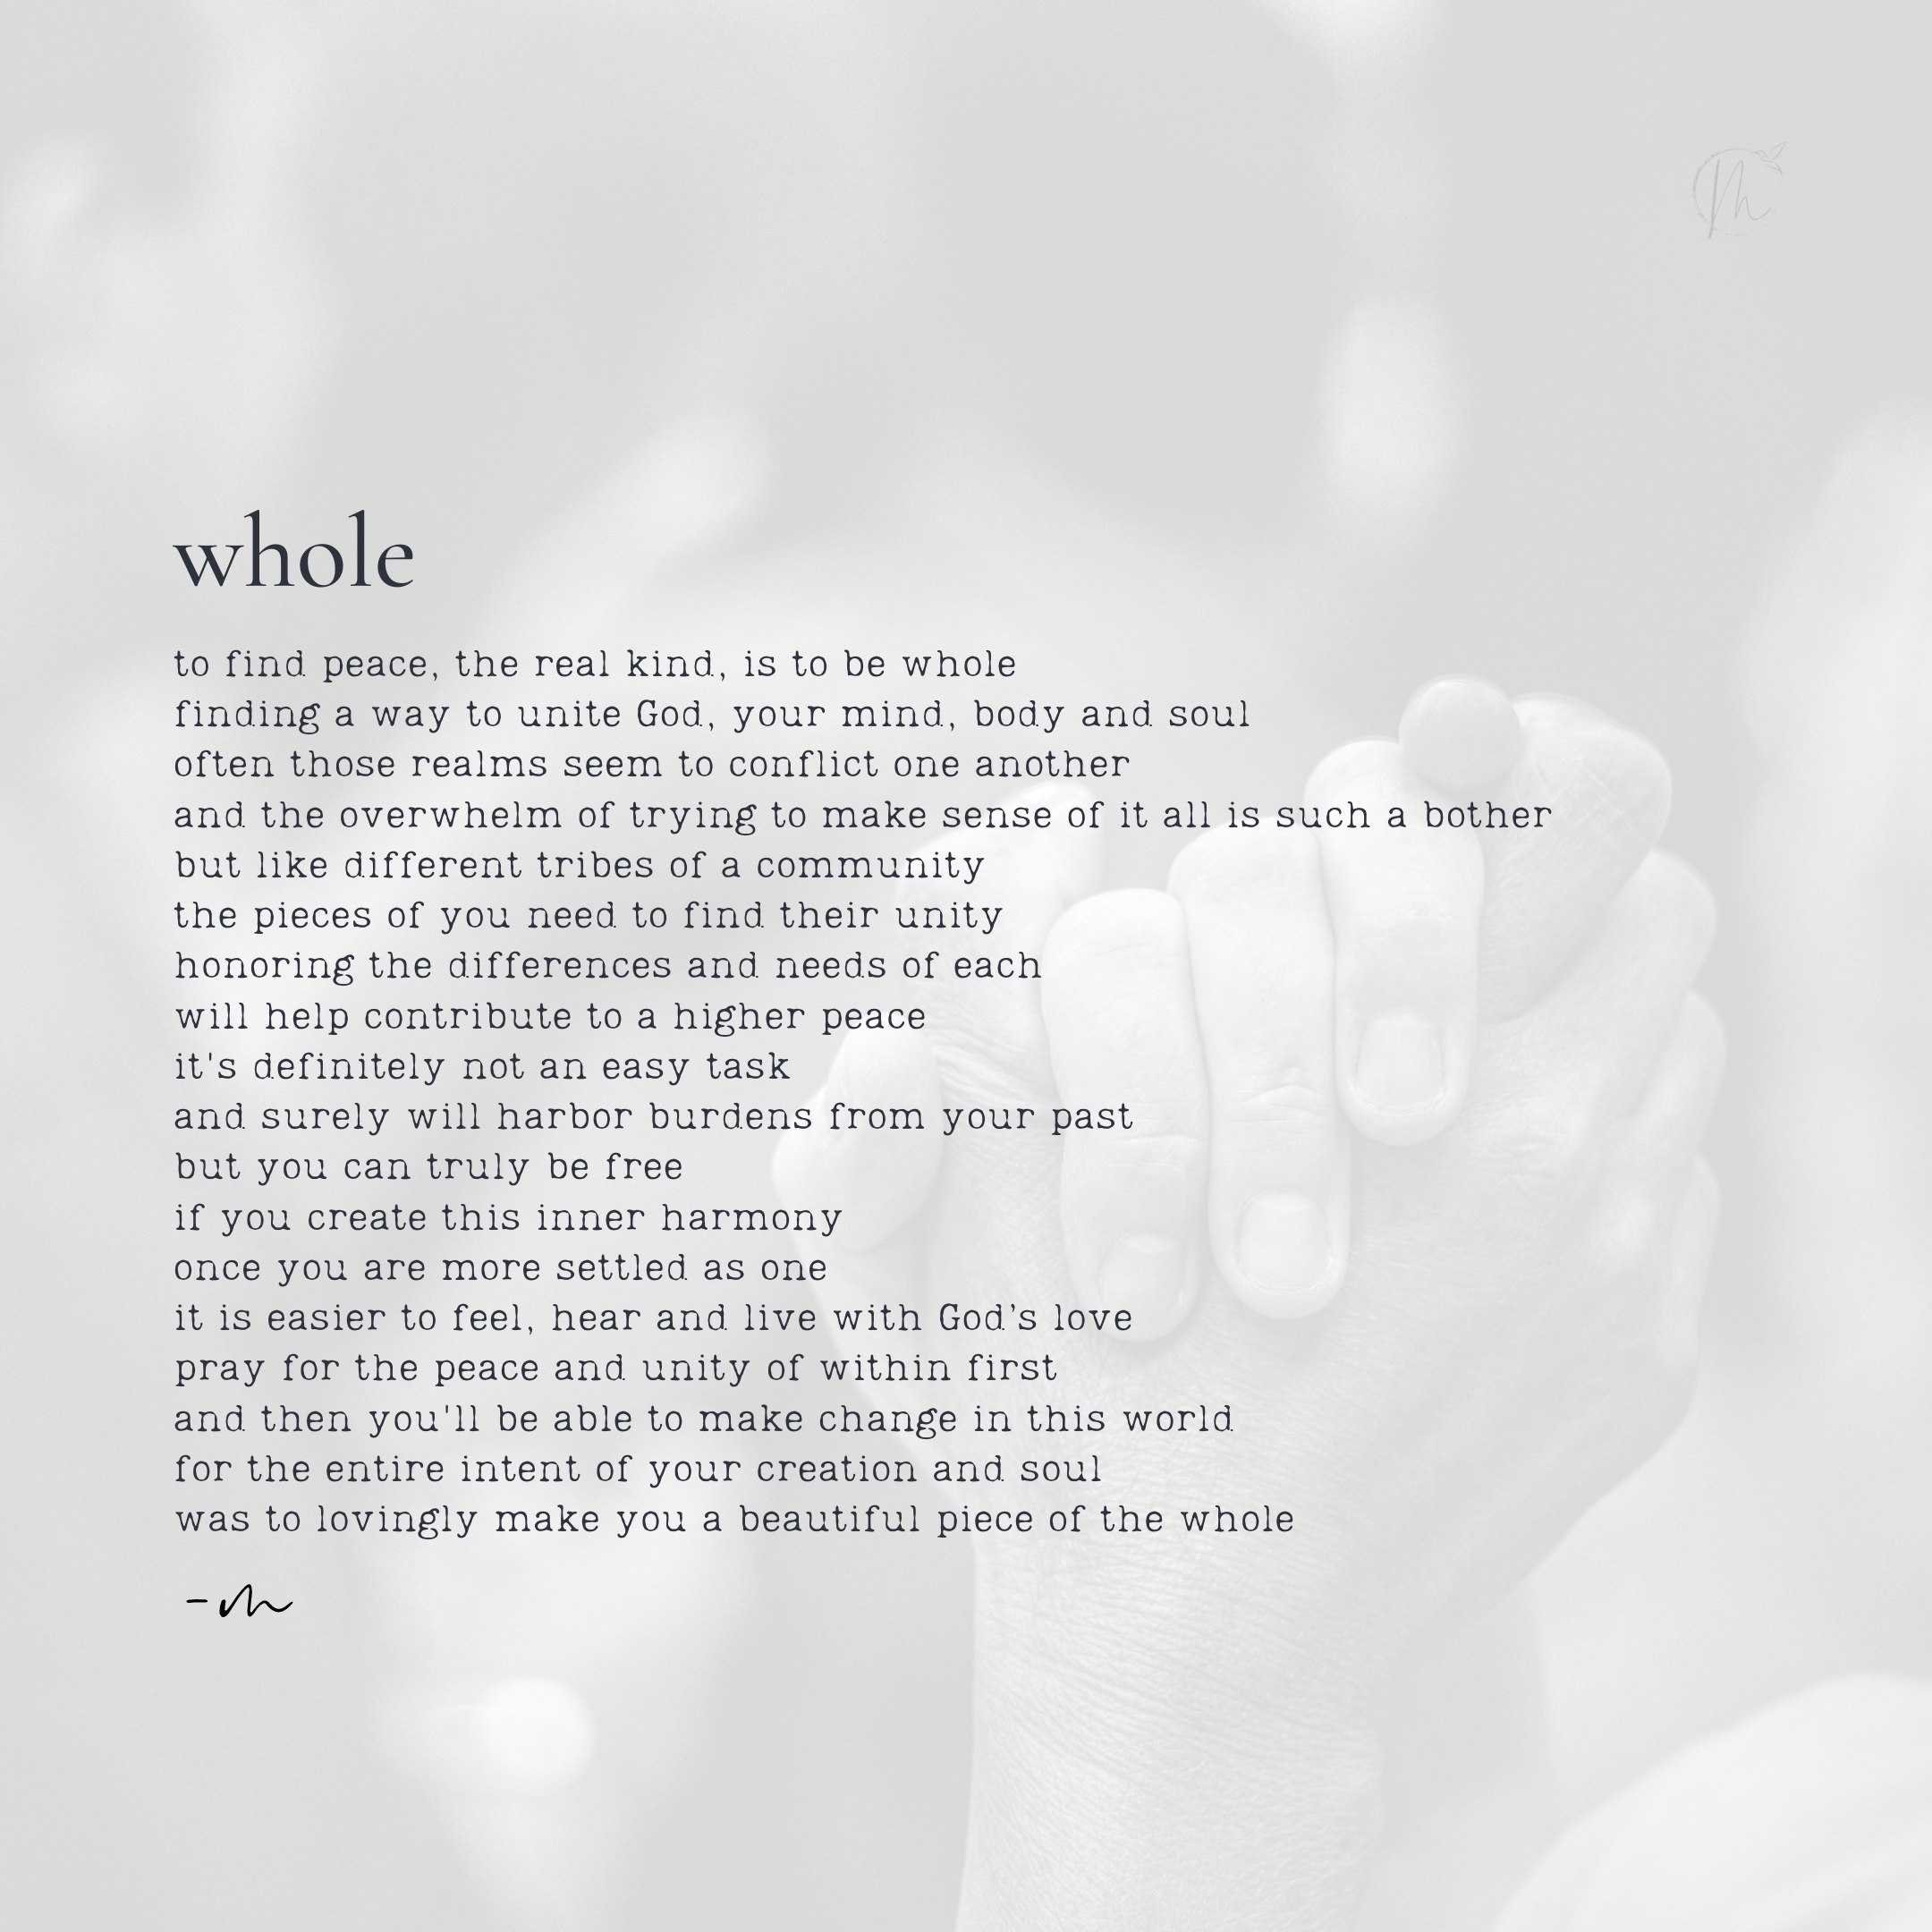 poem - whole with photo.png